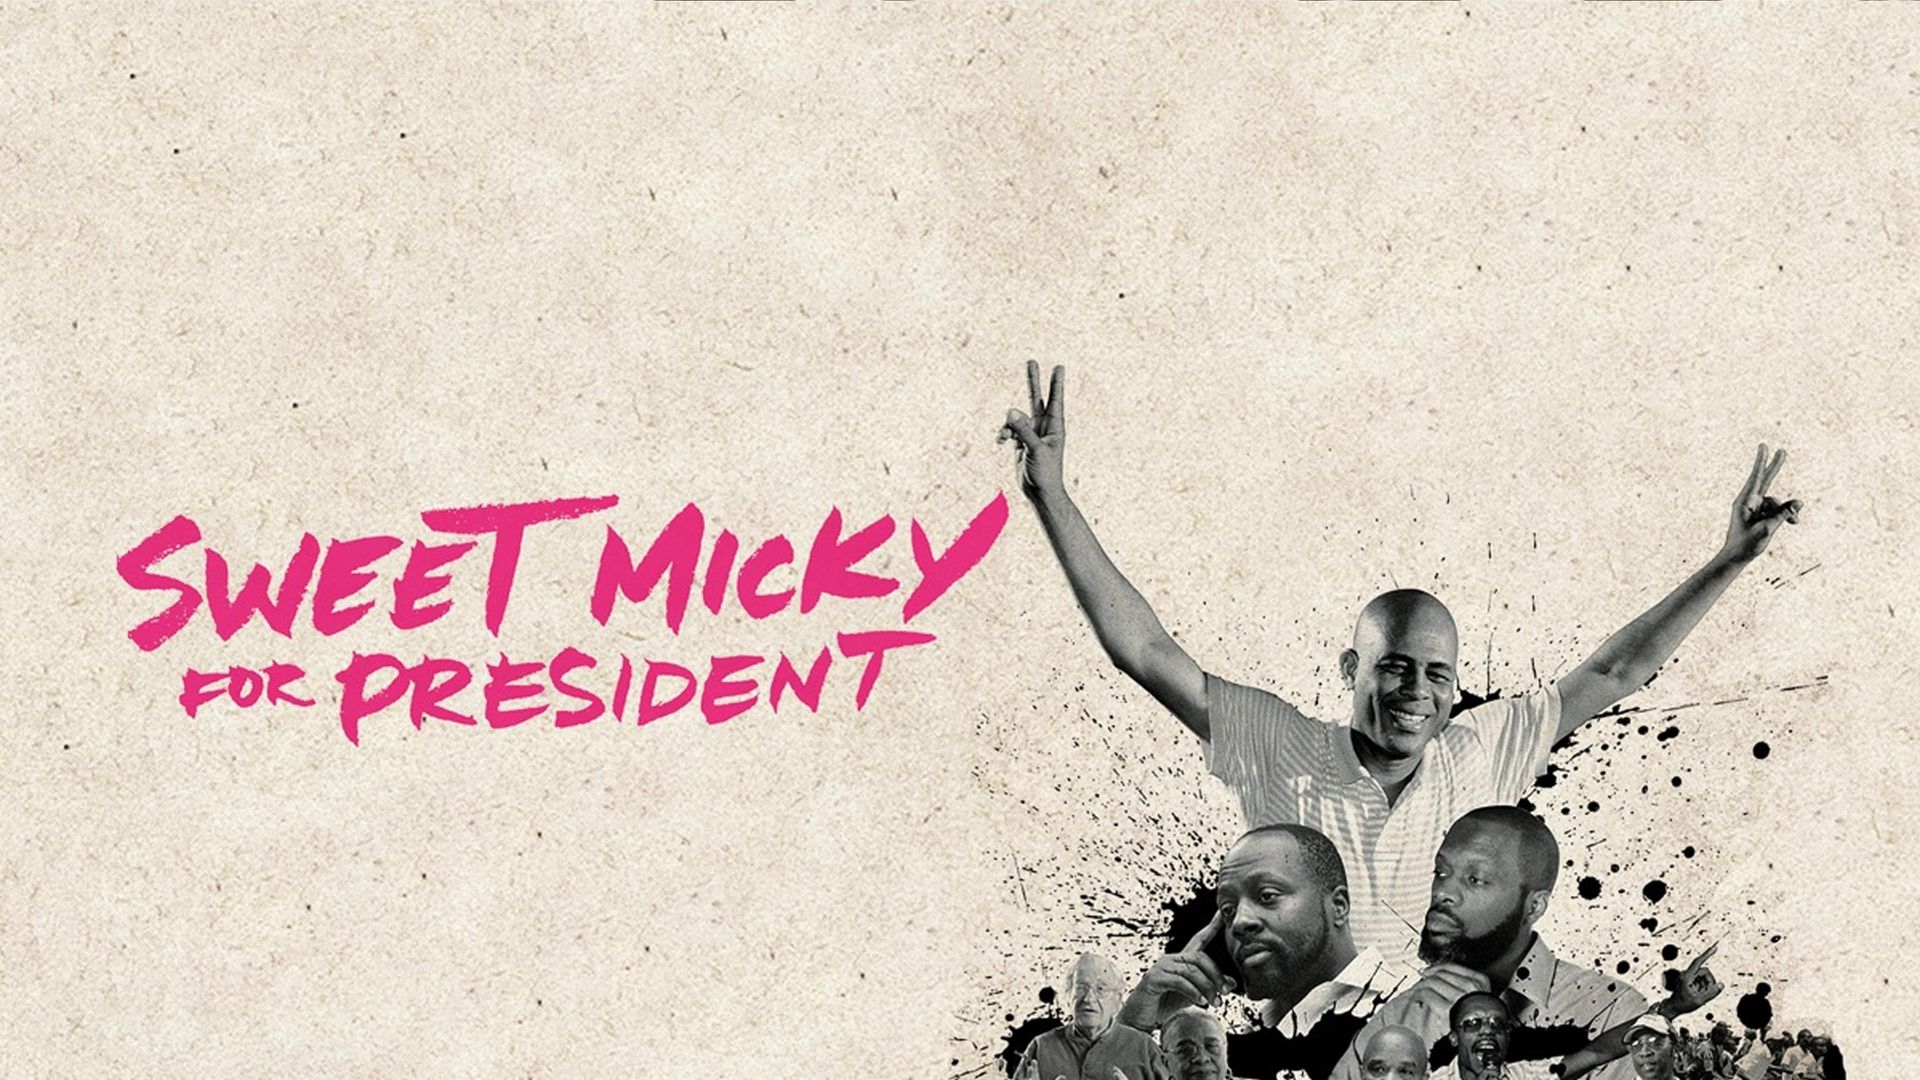 Sweet Micky for President background